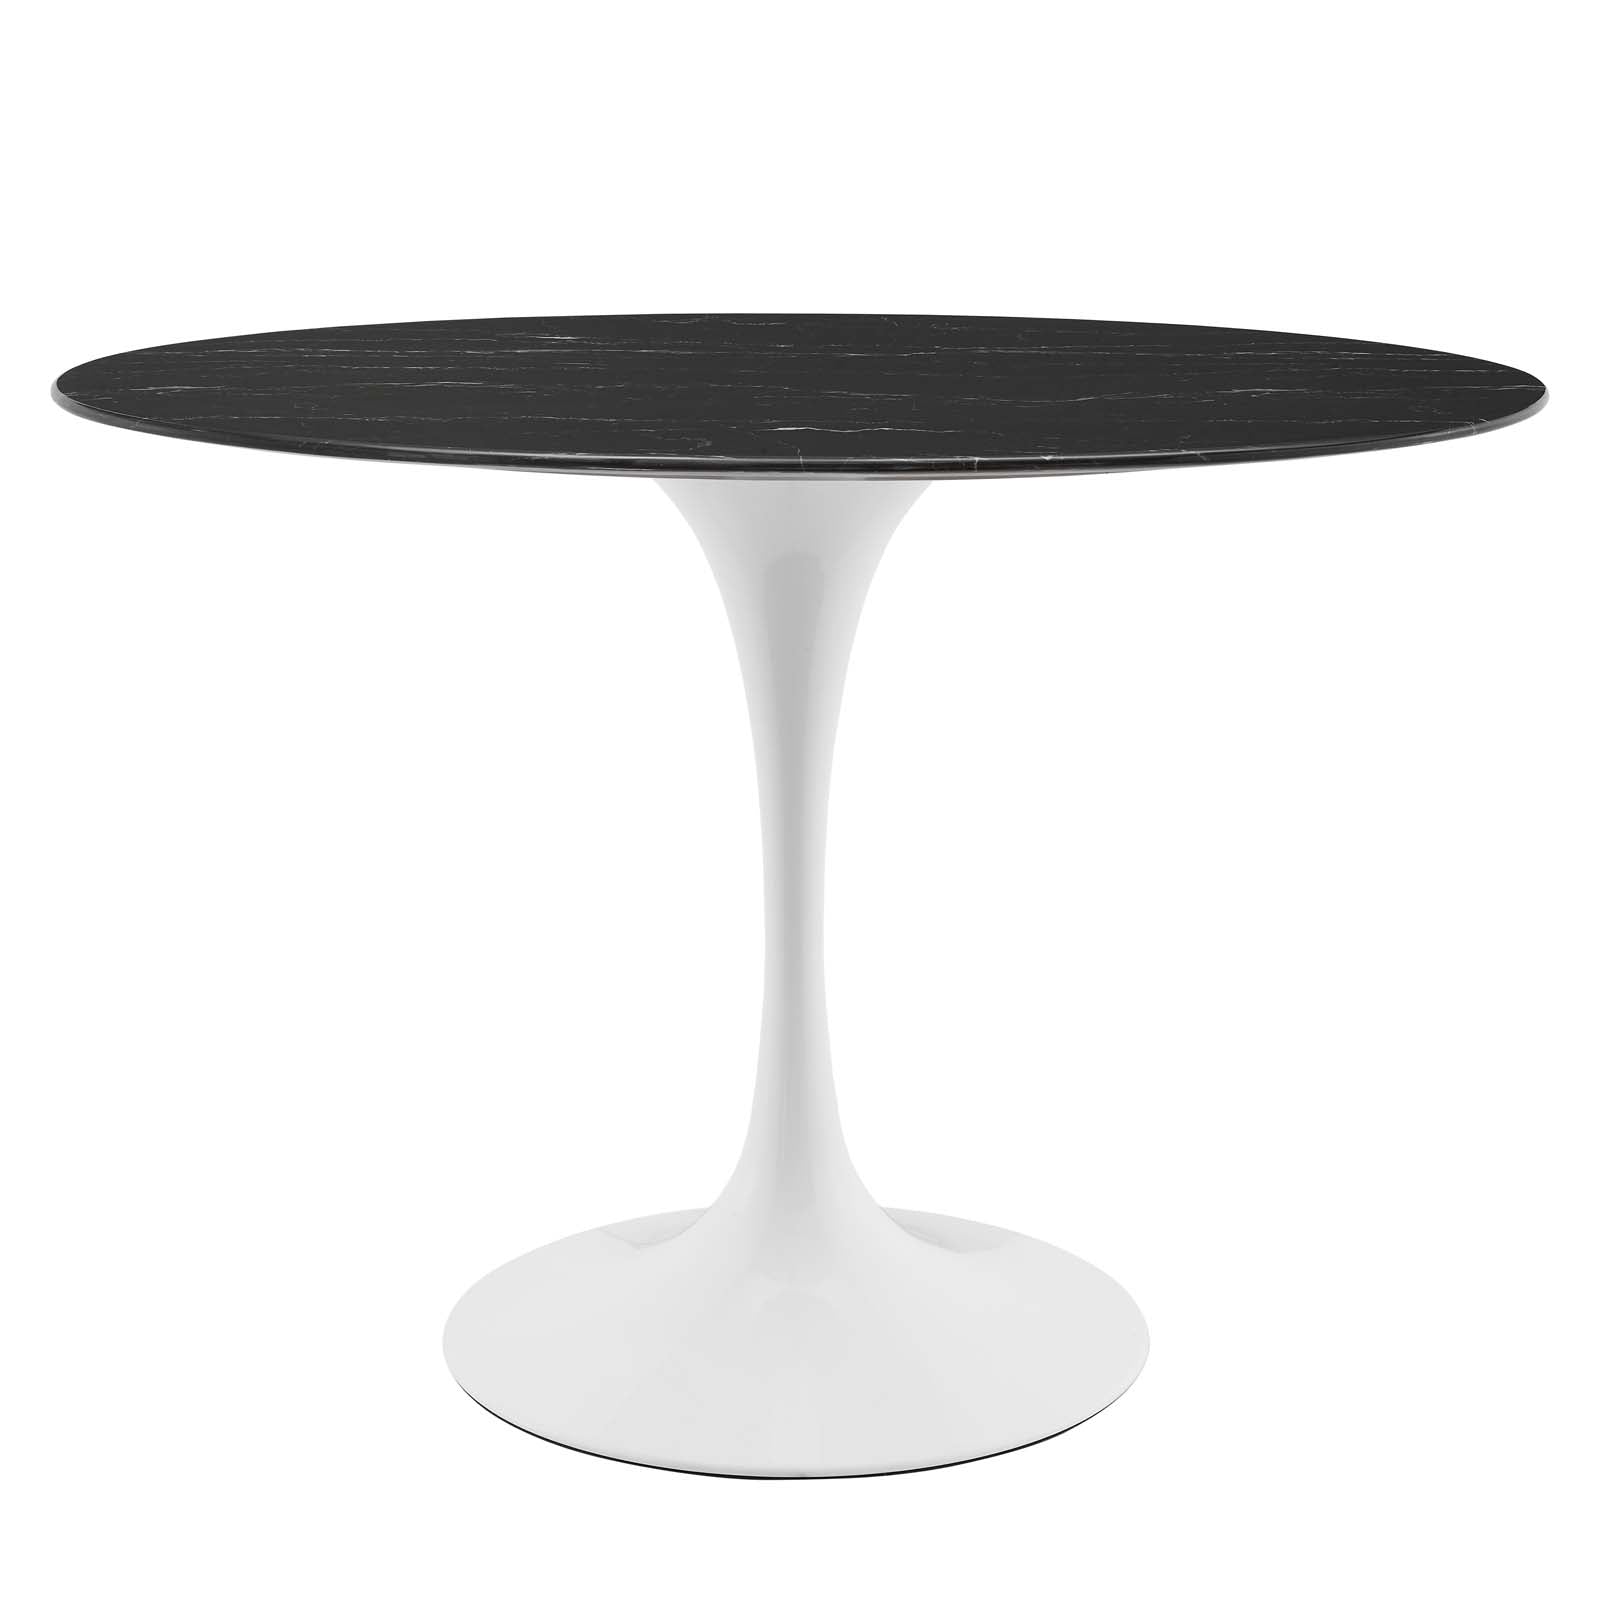 Lippa 42" Oval Artificial Marble Dining Table